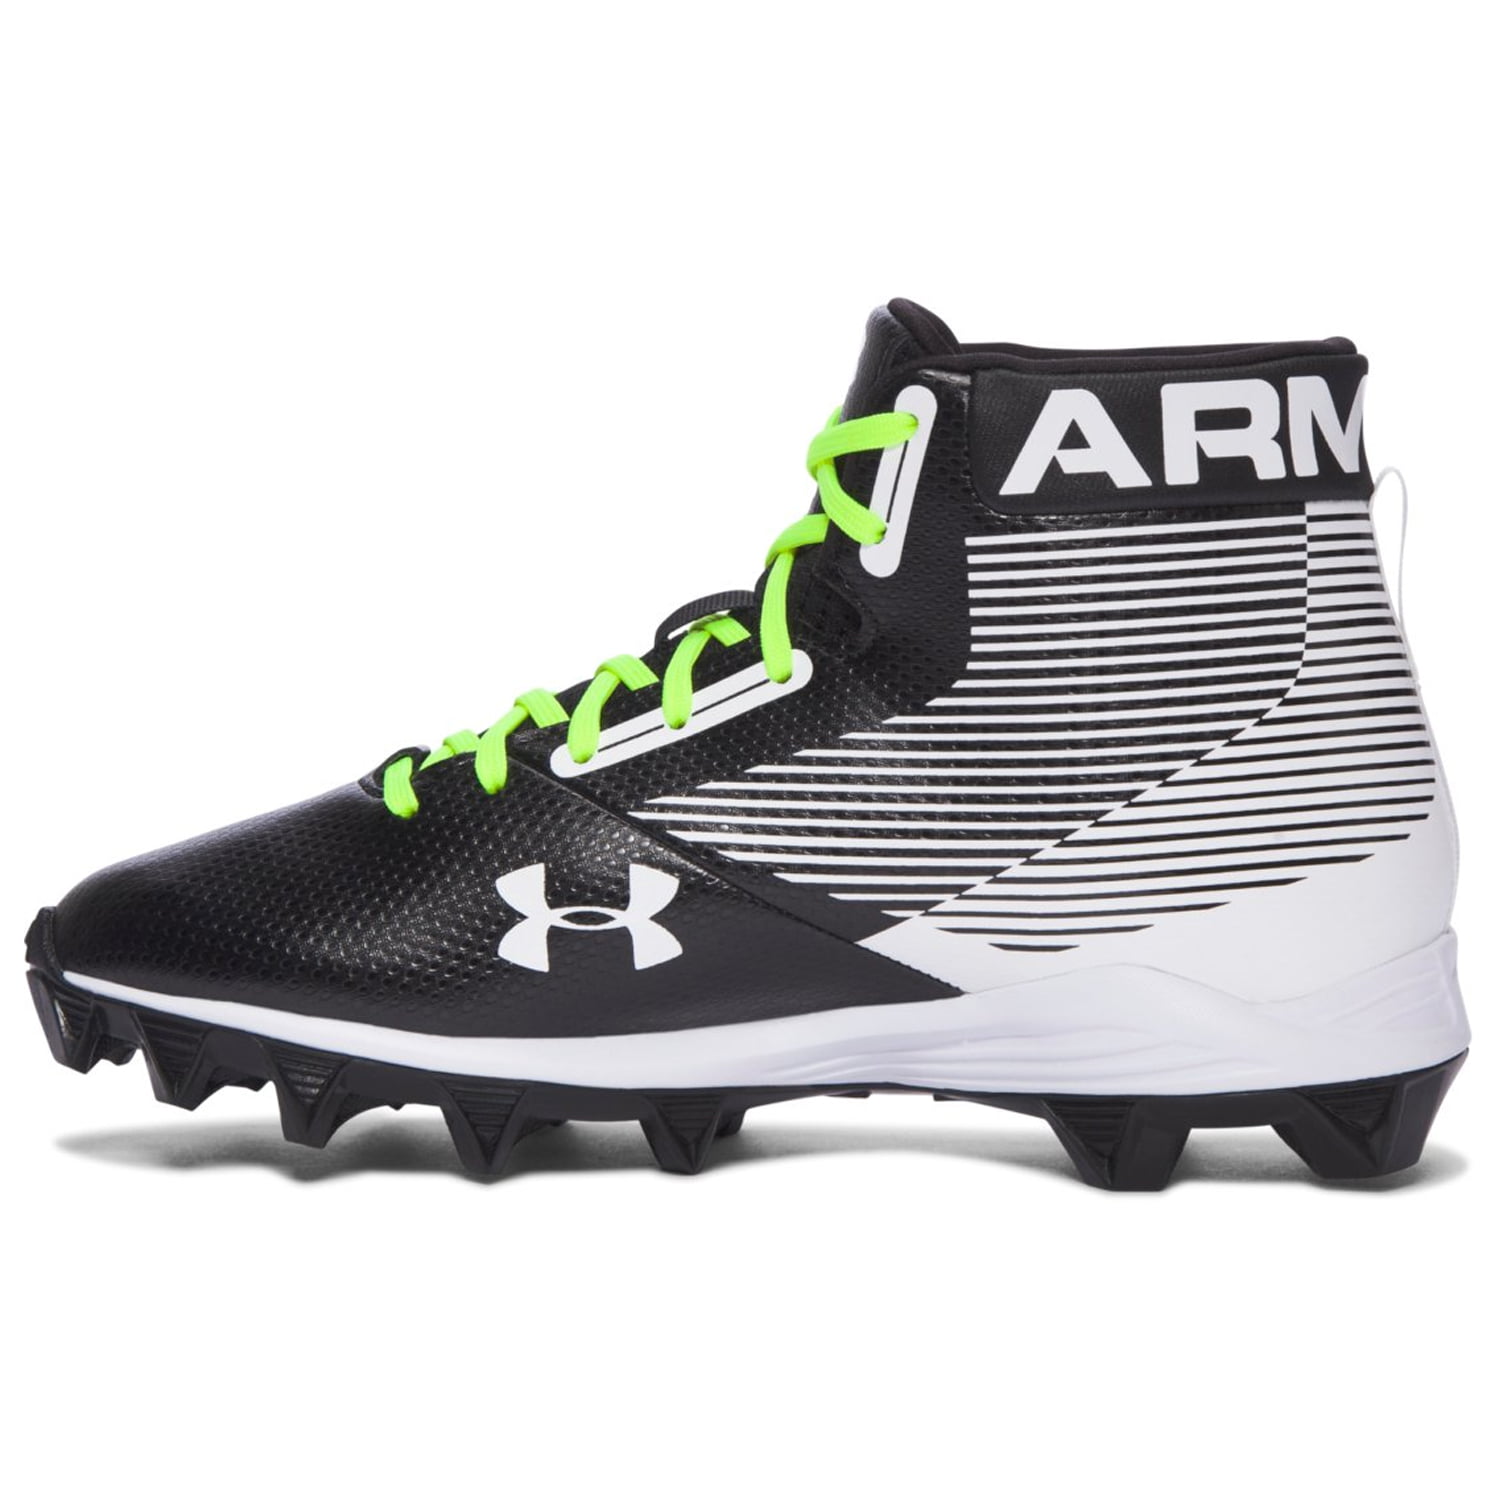 New Youth Under Armour Renegade RM Mid Football Cleats Black/White-Pick Size 